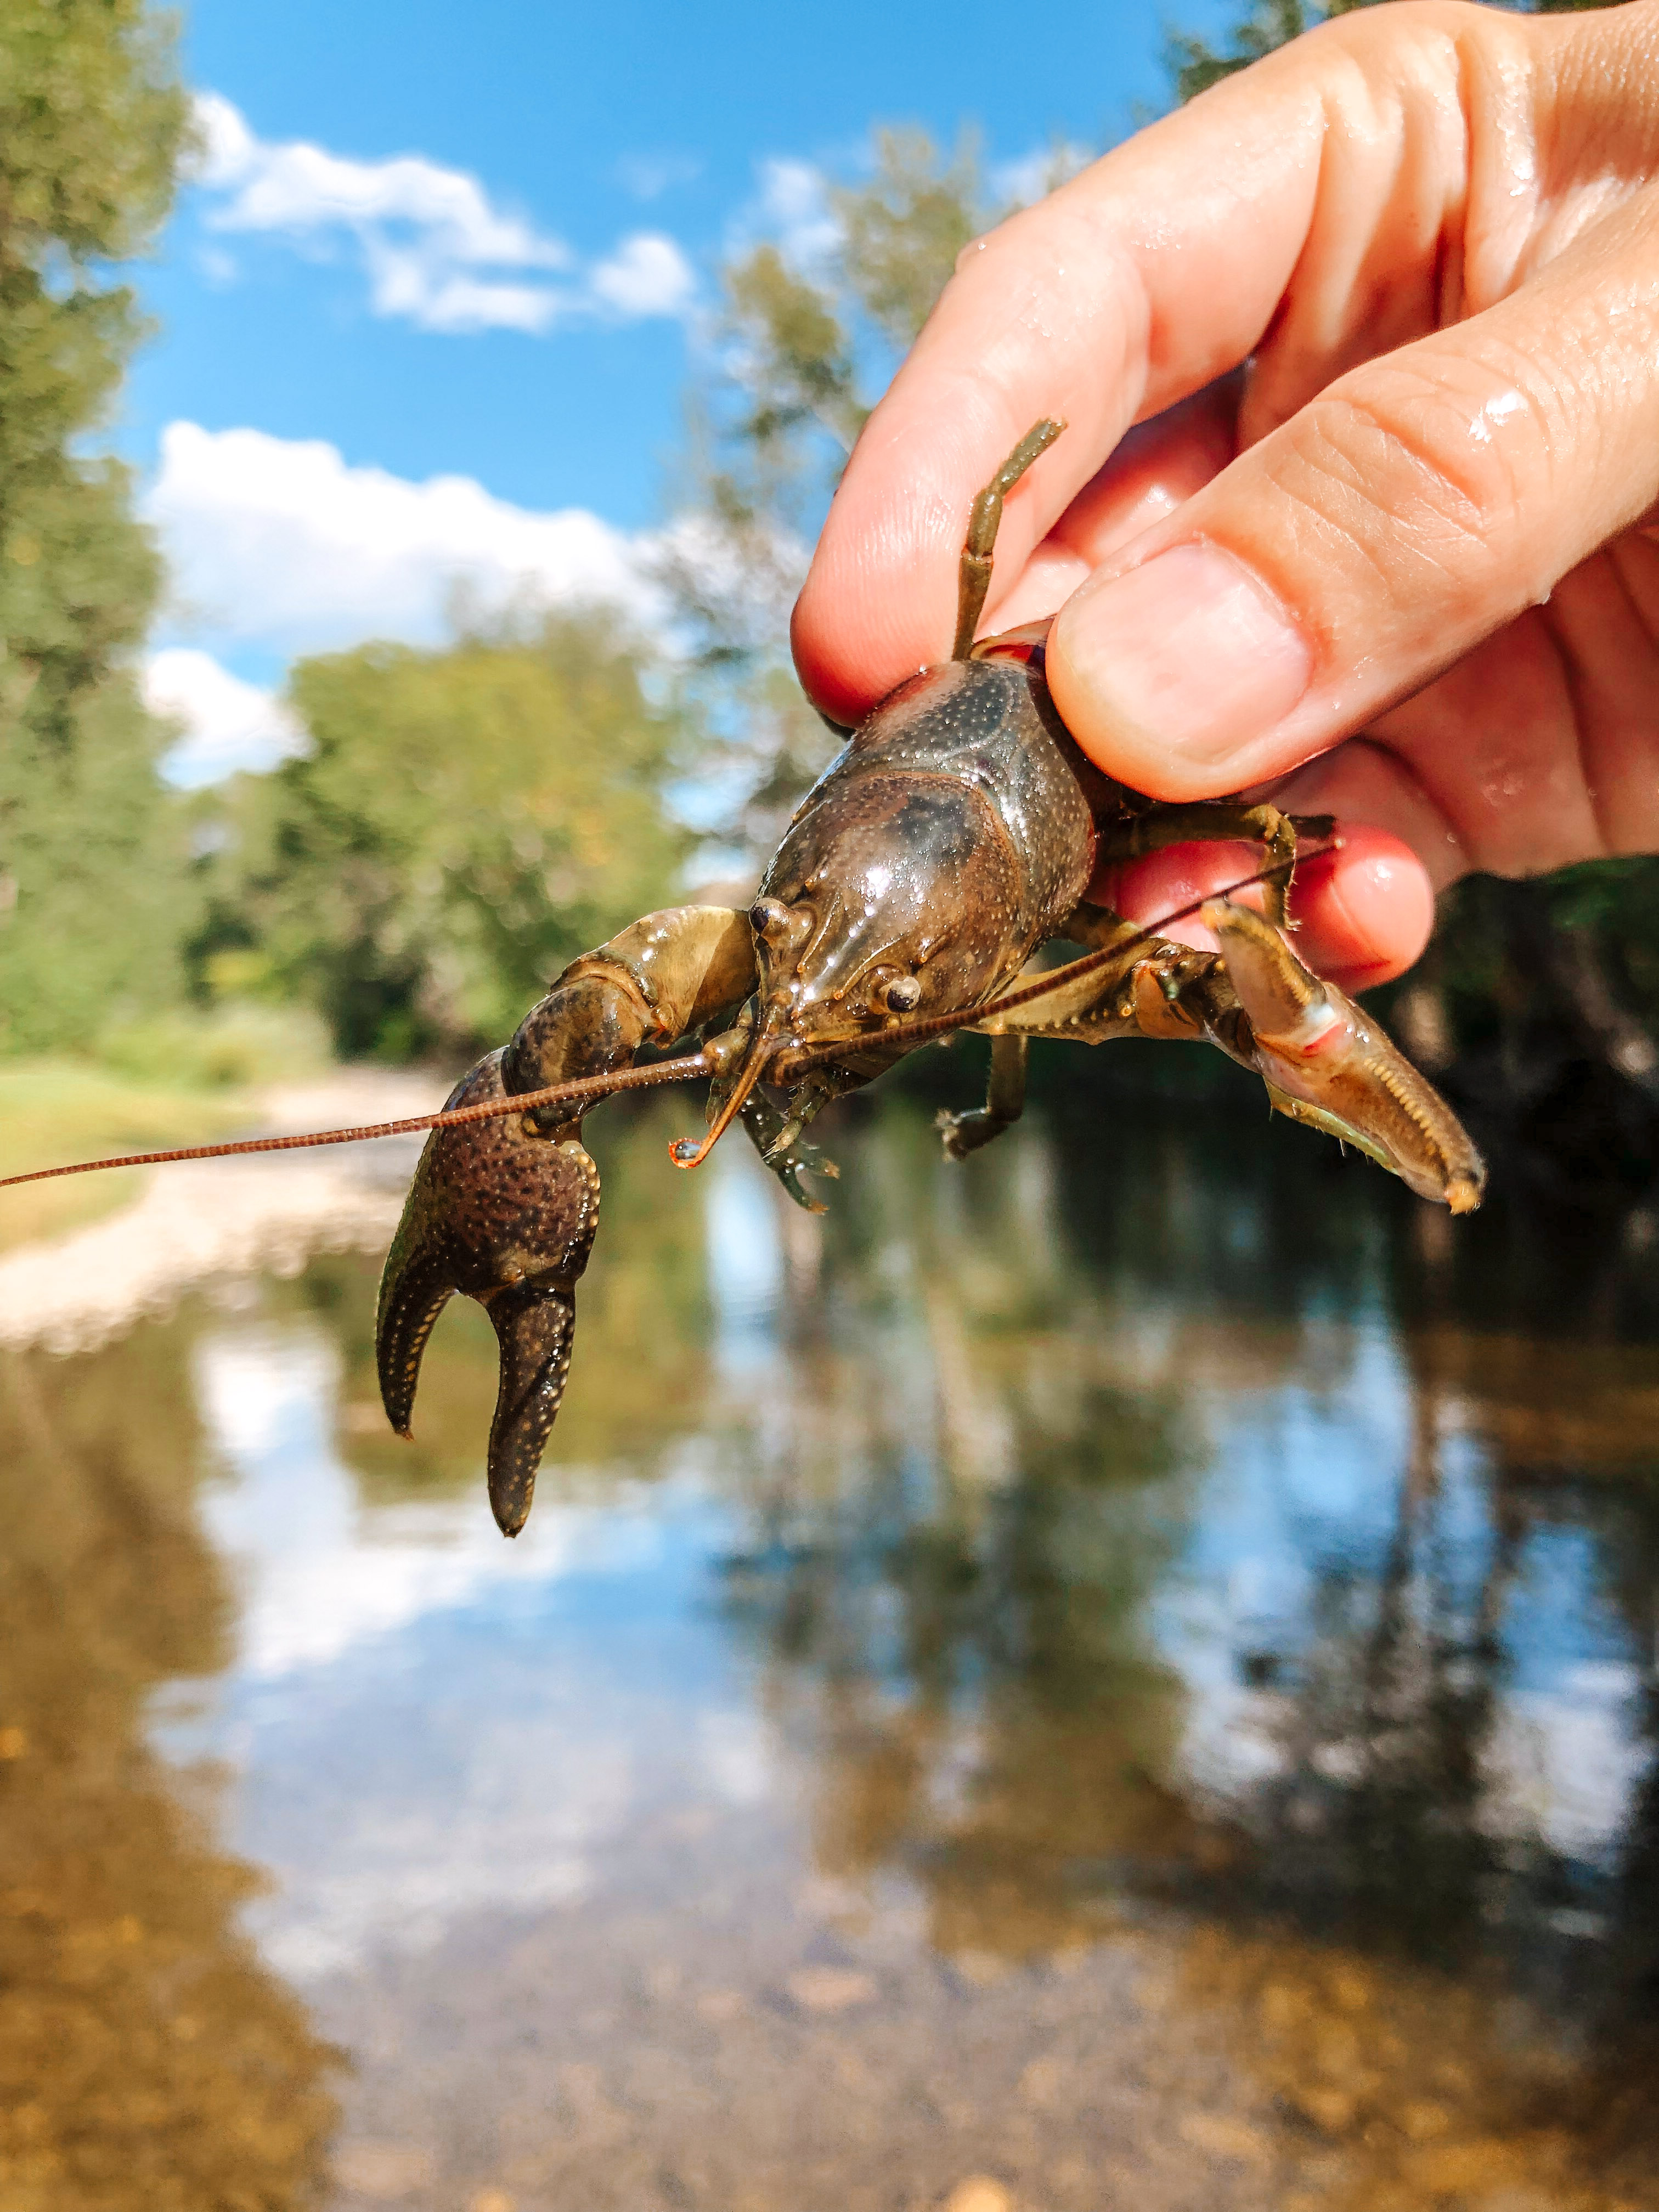 Live Crawfish - Best Stock Images - Holding a live crawdad or crayfish, a freshwater lobster, over a shallow river.